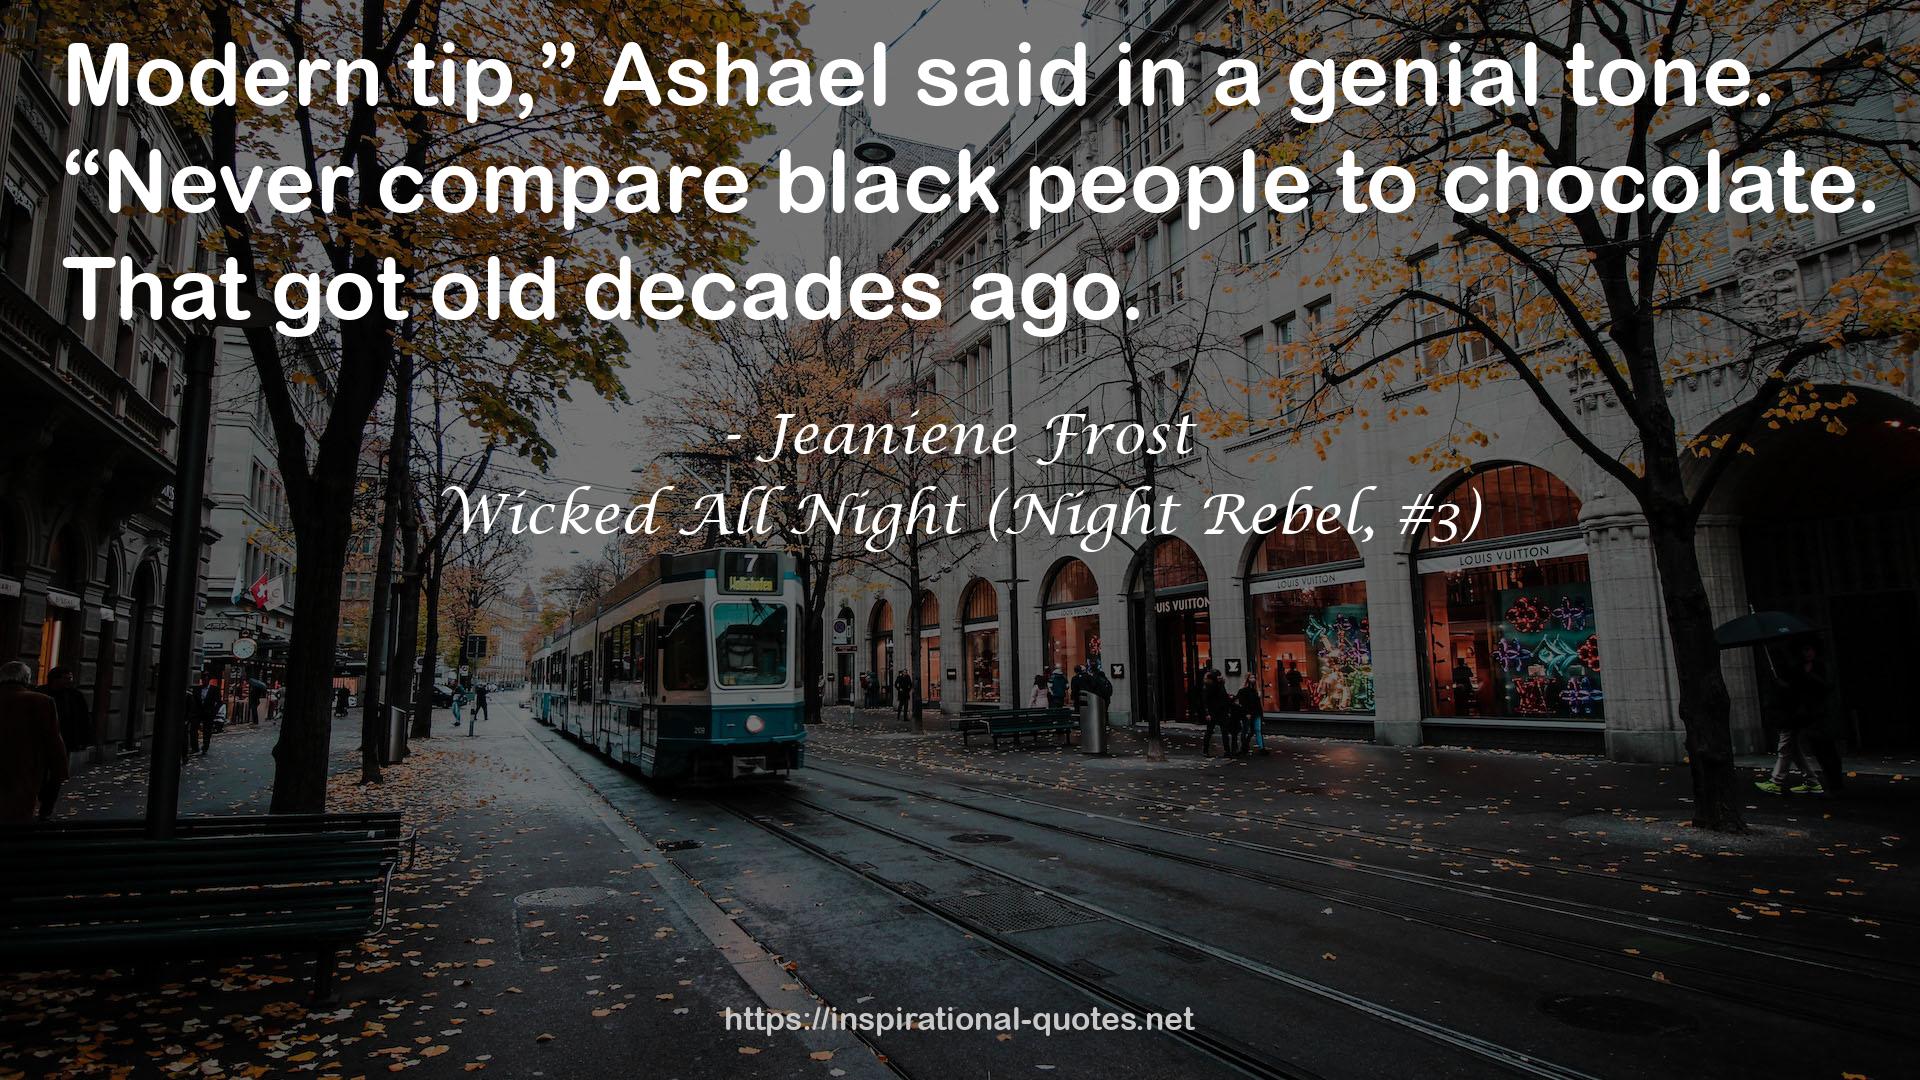 Wicked All Night (Night Rebel, #3) QUOTES